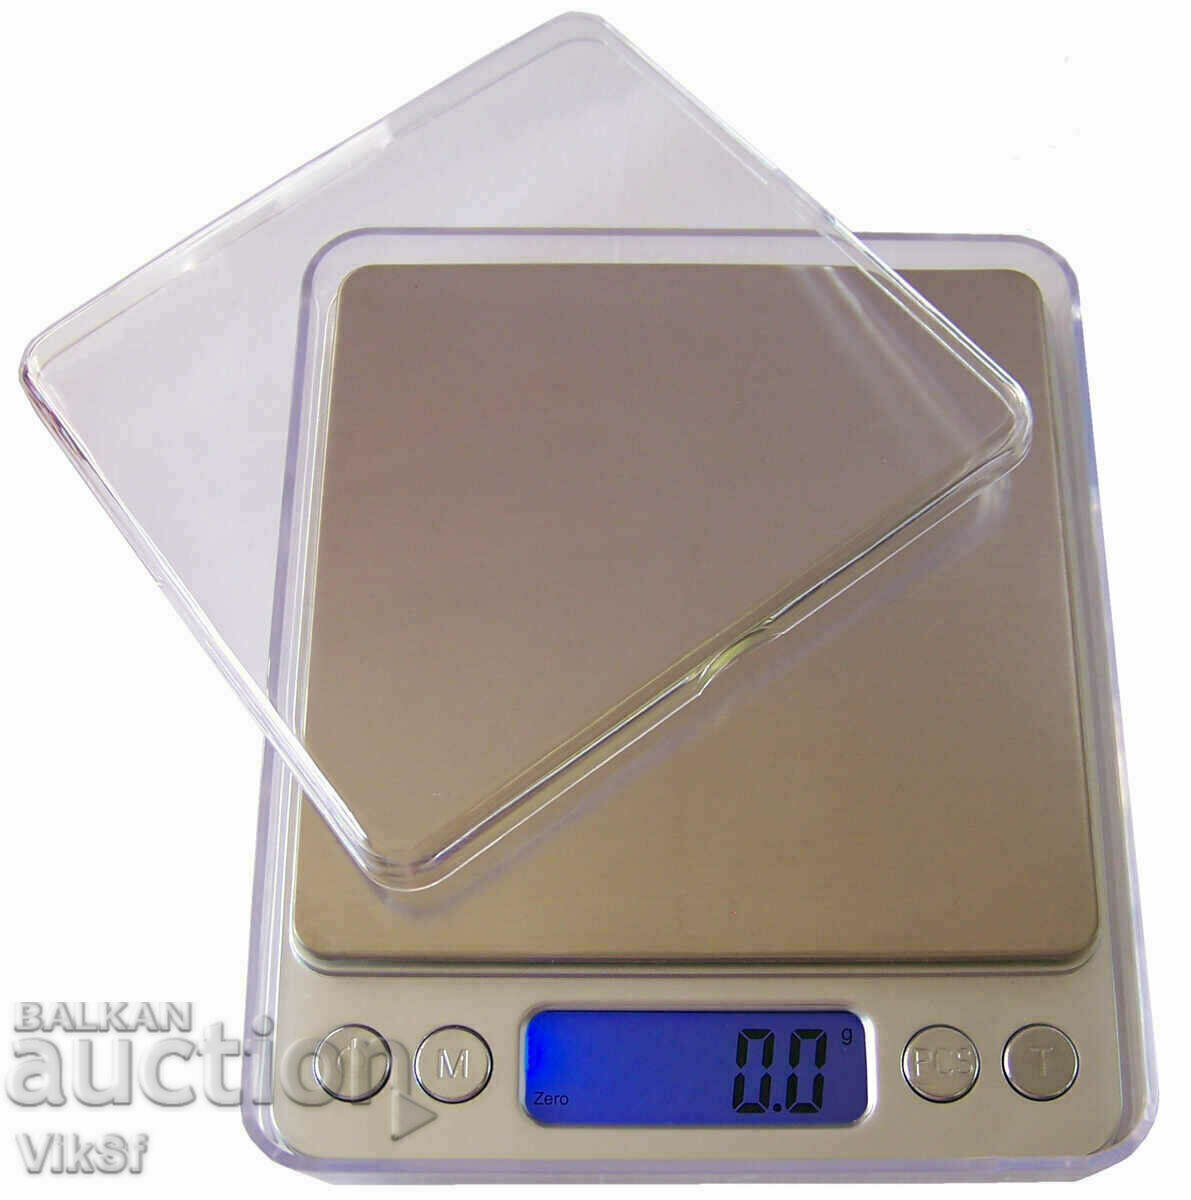 Professional electronic scale 500g / 0.01g